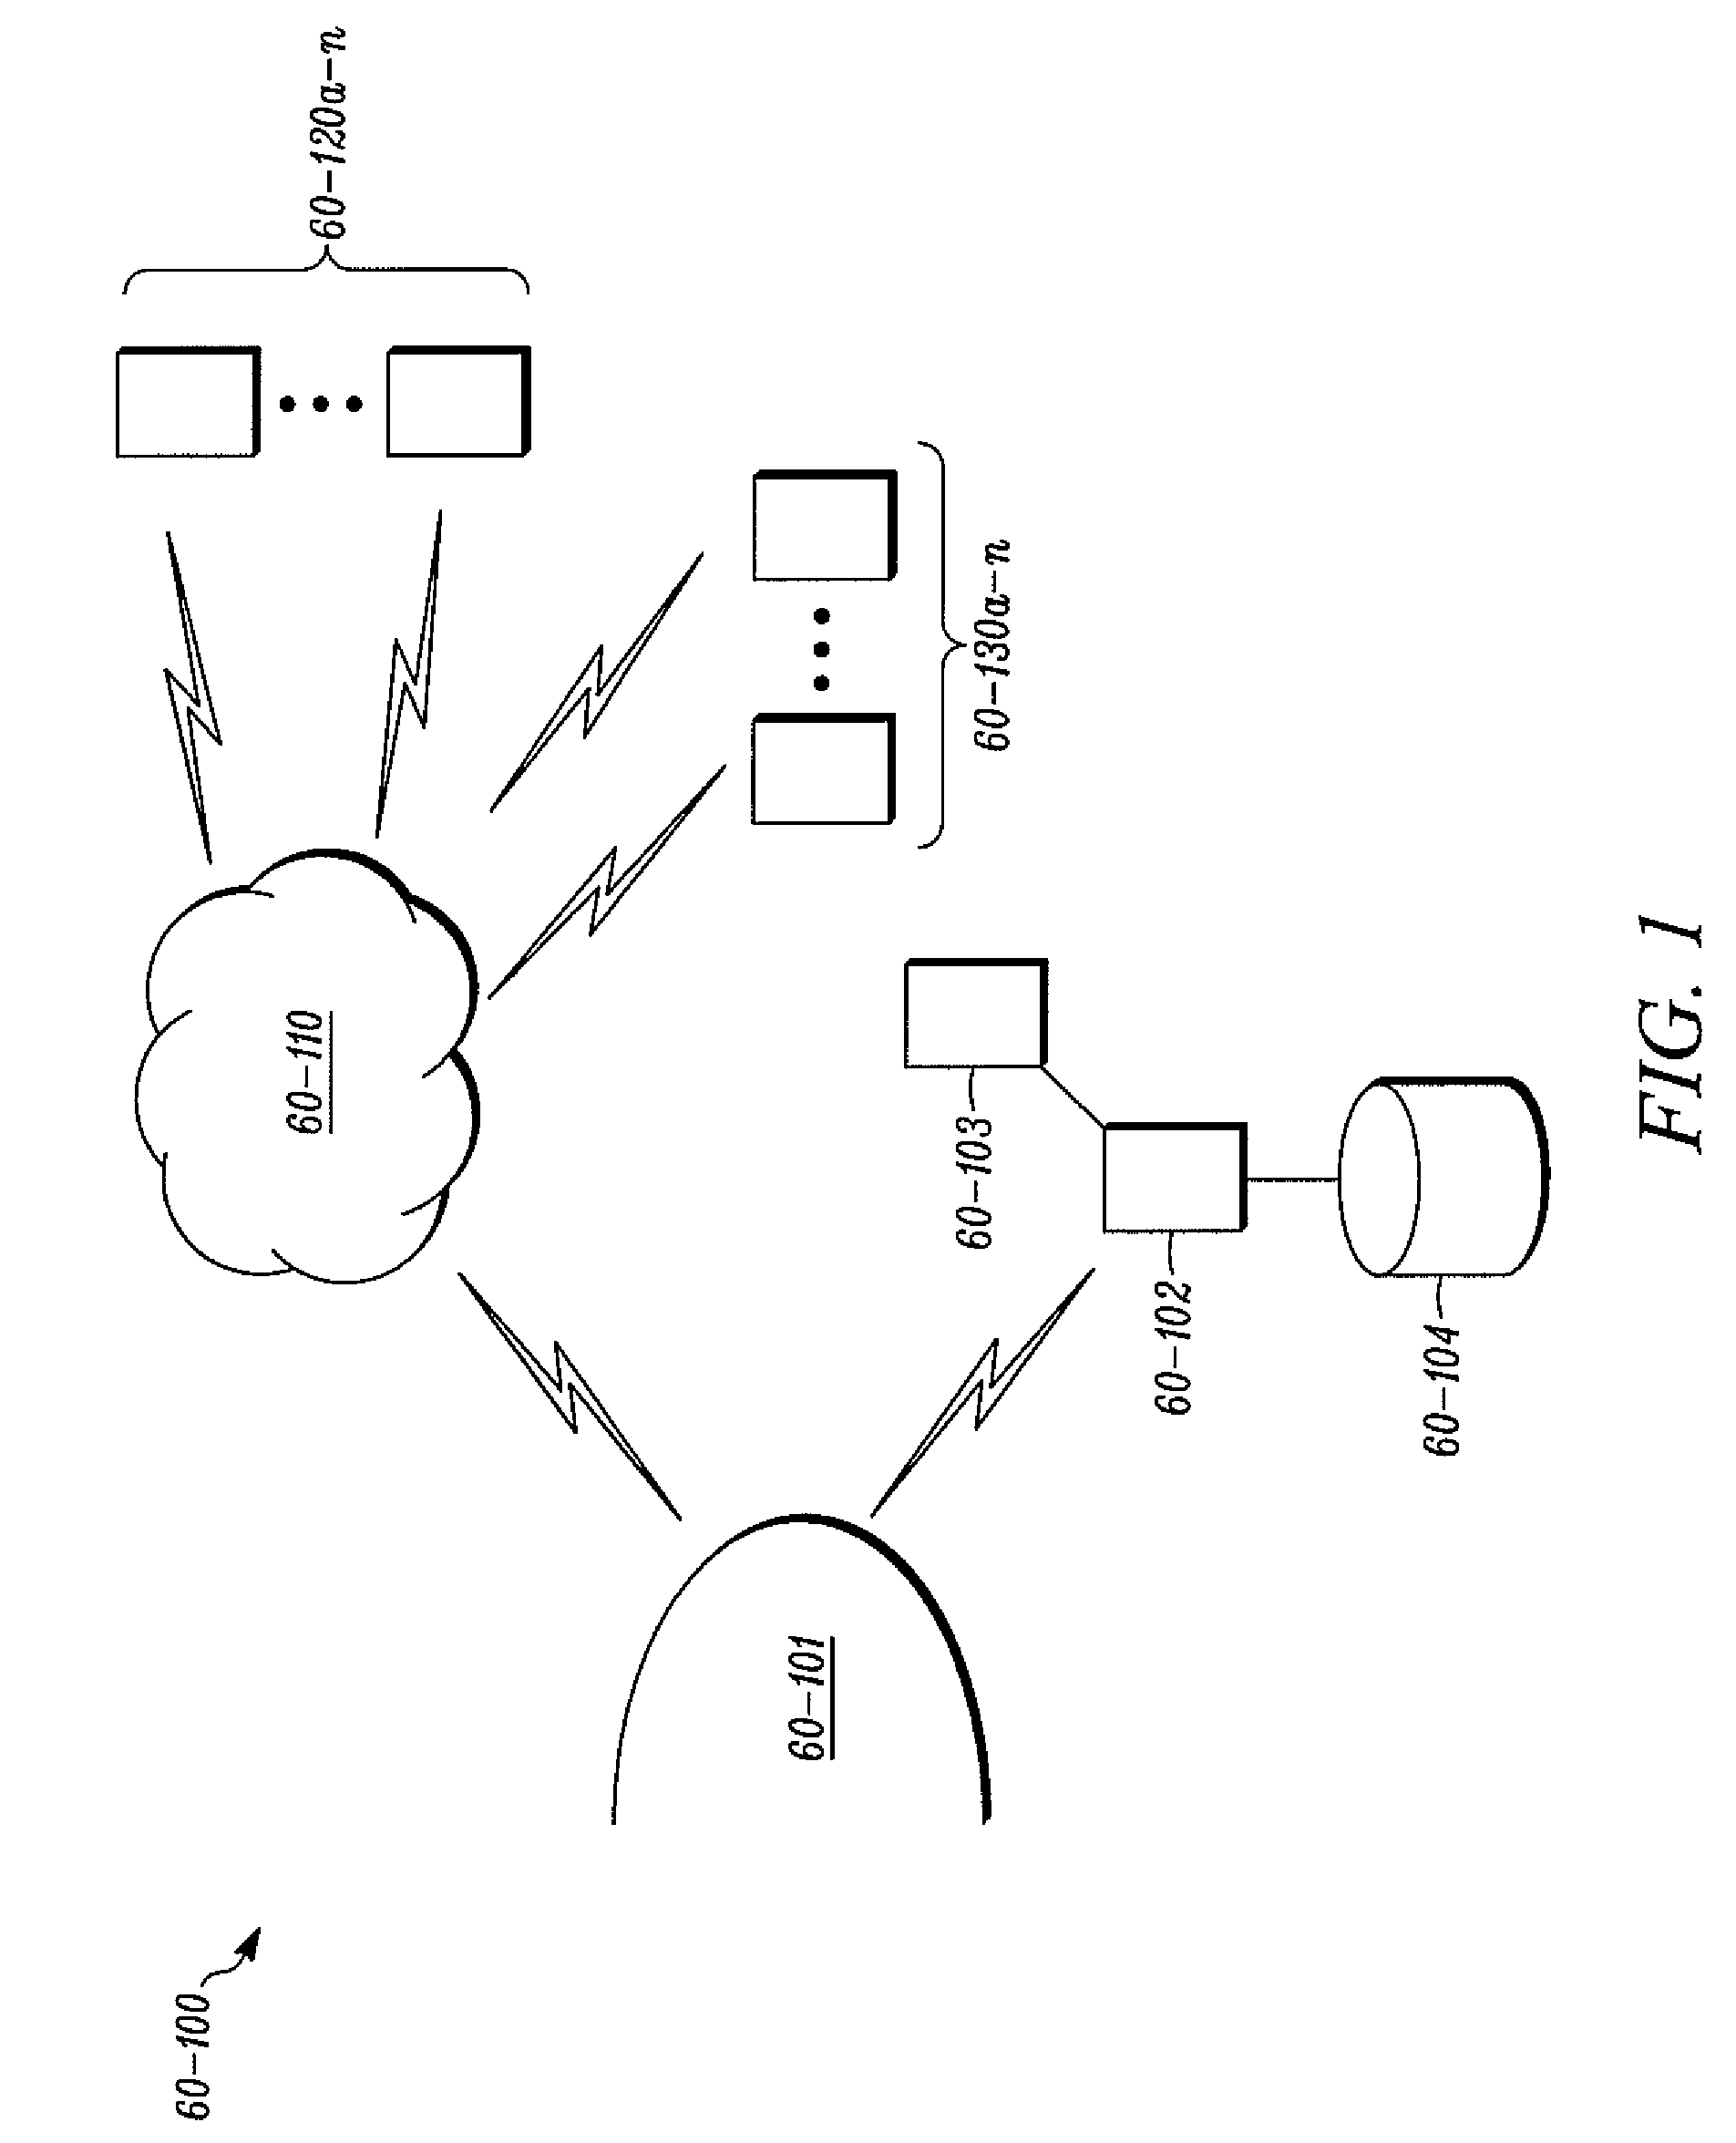 System and method for predictive booking of reservations based on historical aggregation and events